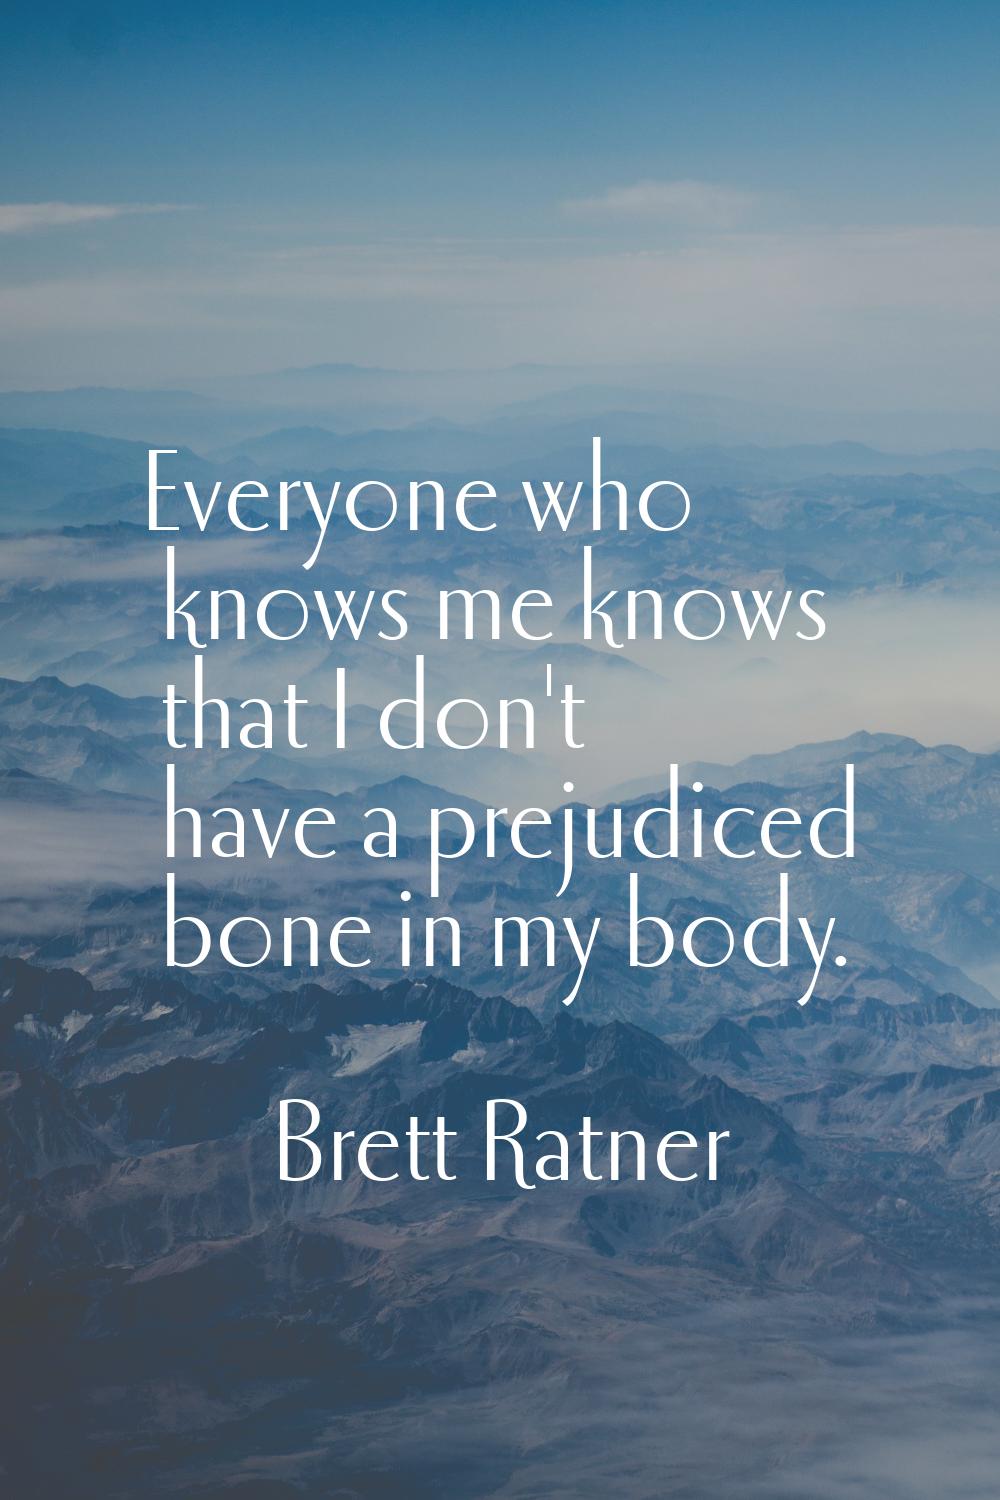 Everyone who knows me knows that I don't have a prejudiced bone in my body.